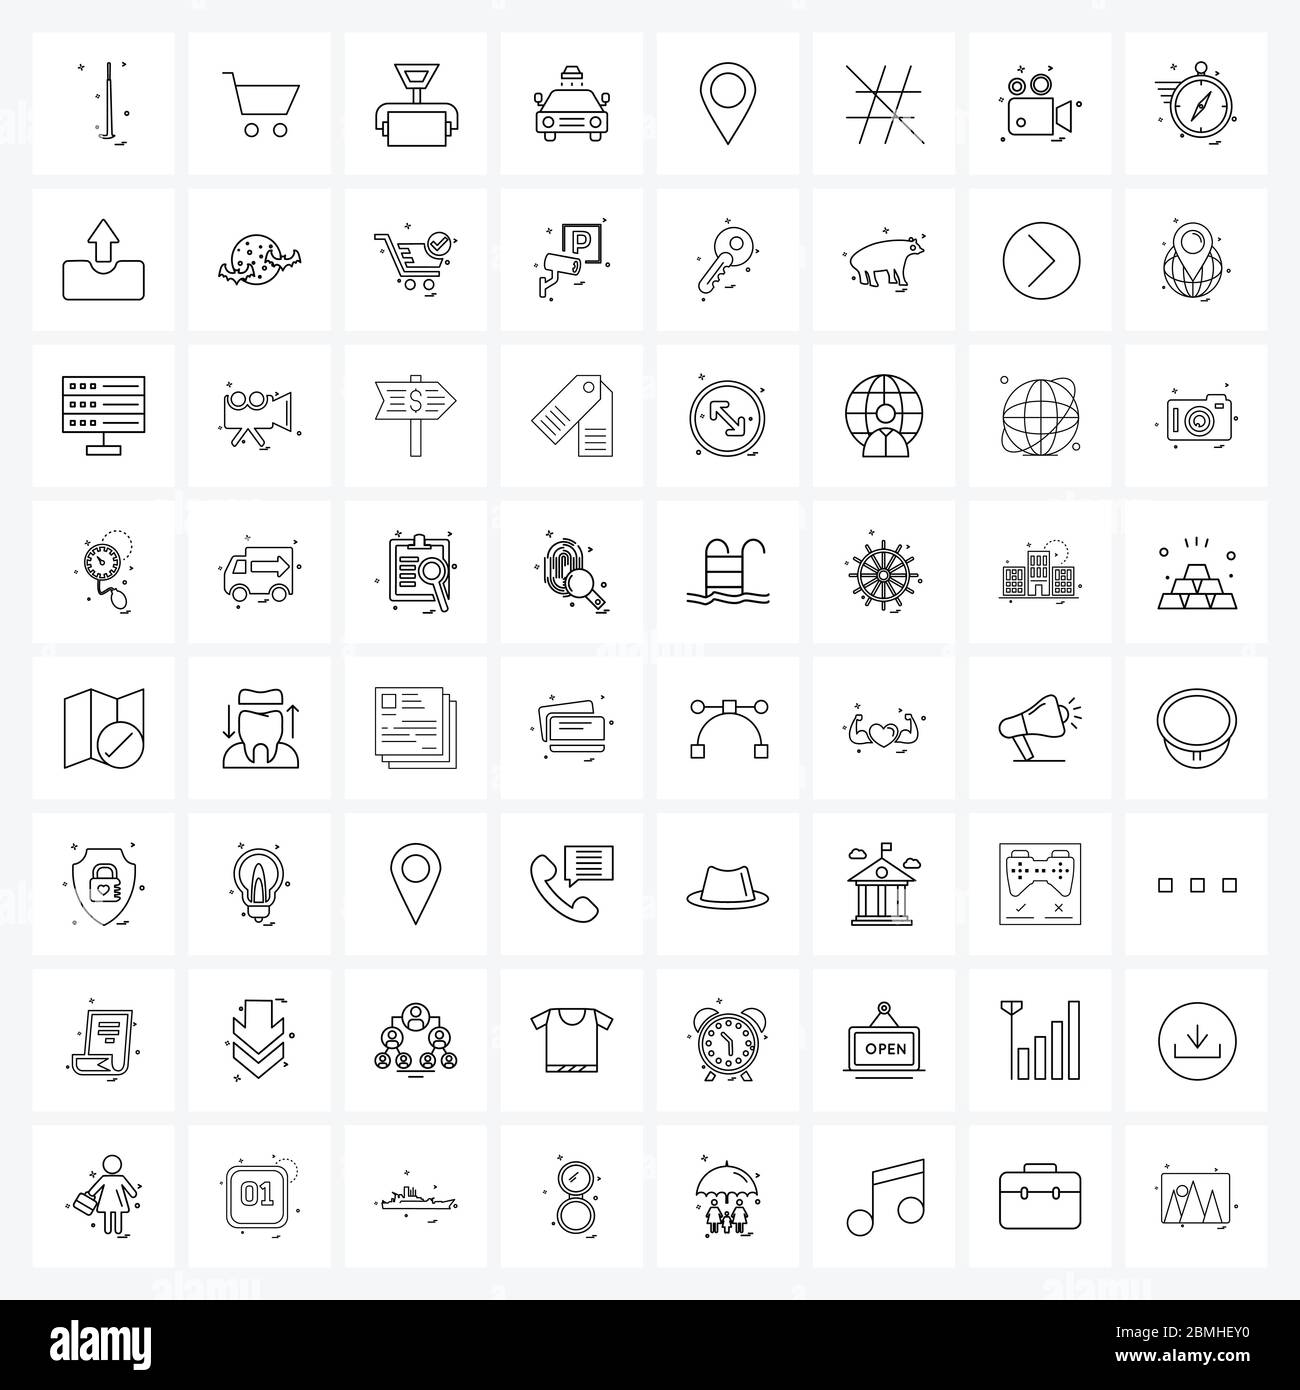 Set of 64 UI Icons and symbols for location, map, sport, map navigation, vehicle Vector Illustration Stock Vector